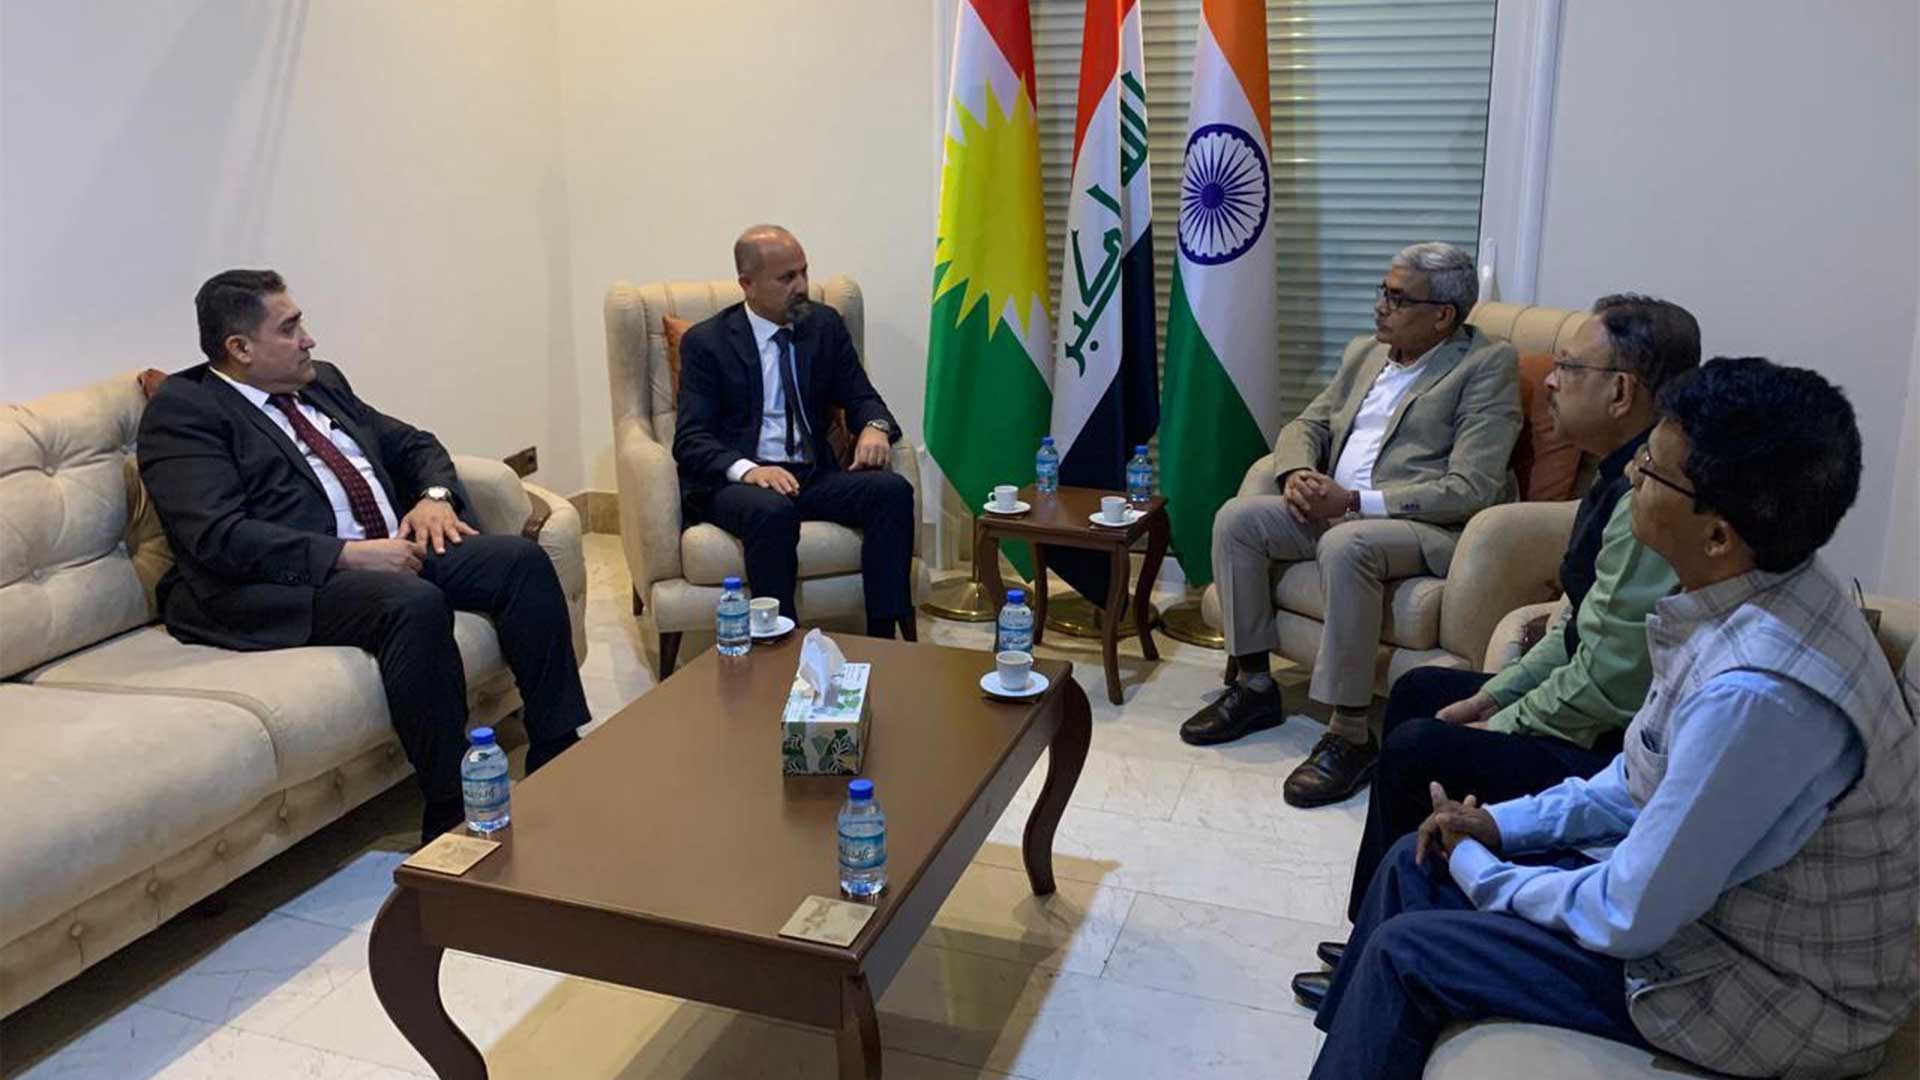  Dara Khaylani, the Head of PUK's Foreign Relations, and Indian CG Madan Gopal's meeting.